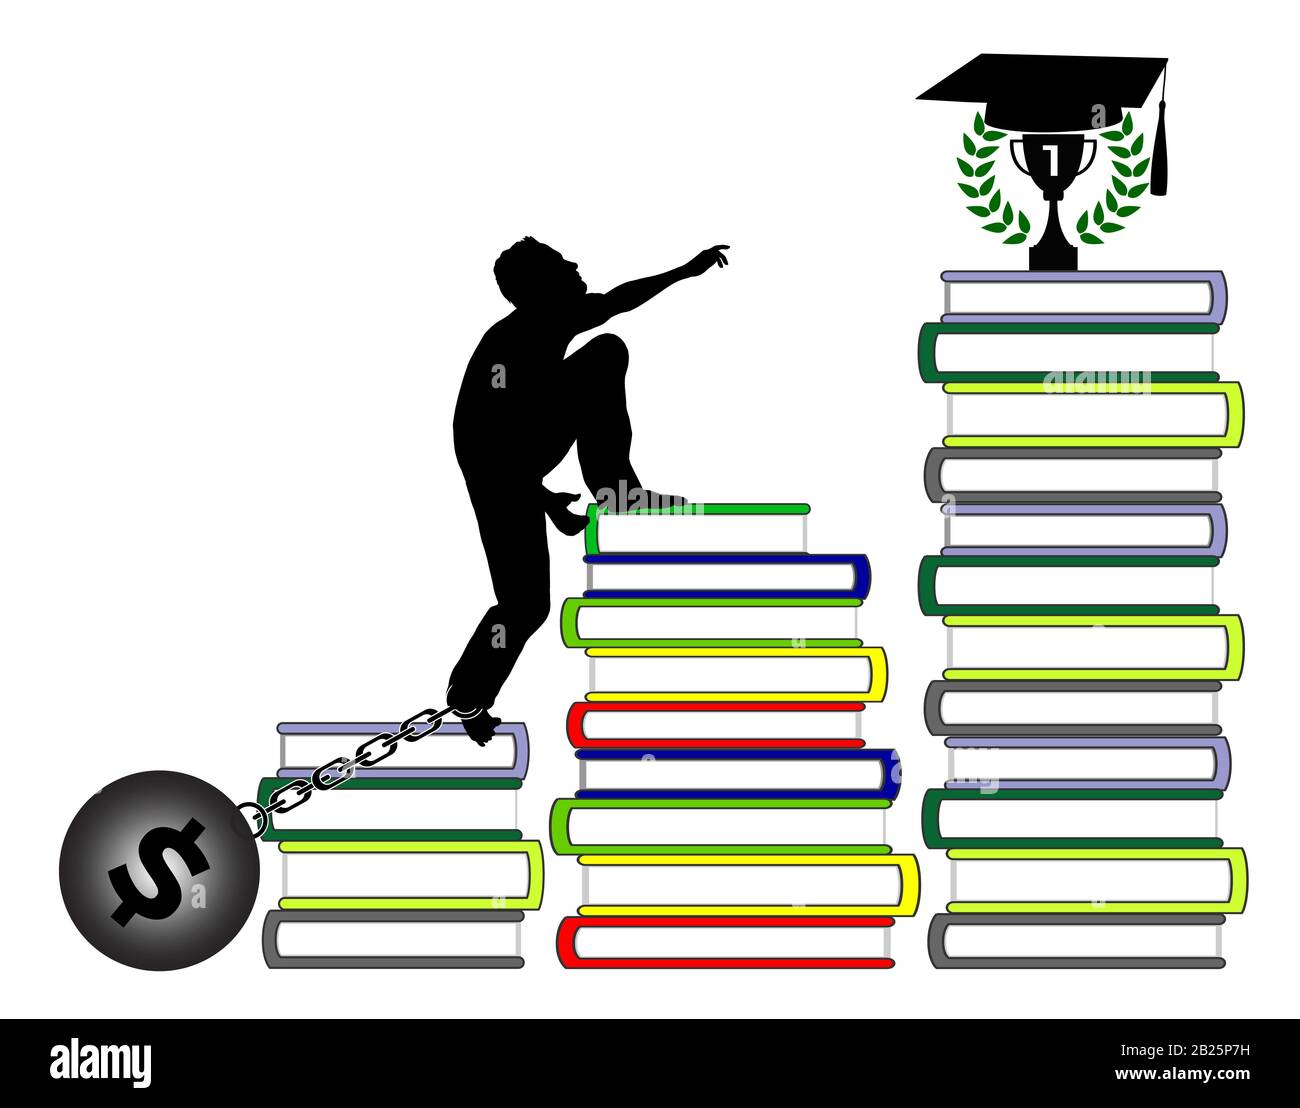 Low income people cannot or hardly afford academic careers due to high tuition fees at university or college. Stock Photo